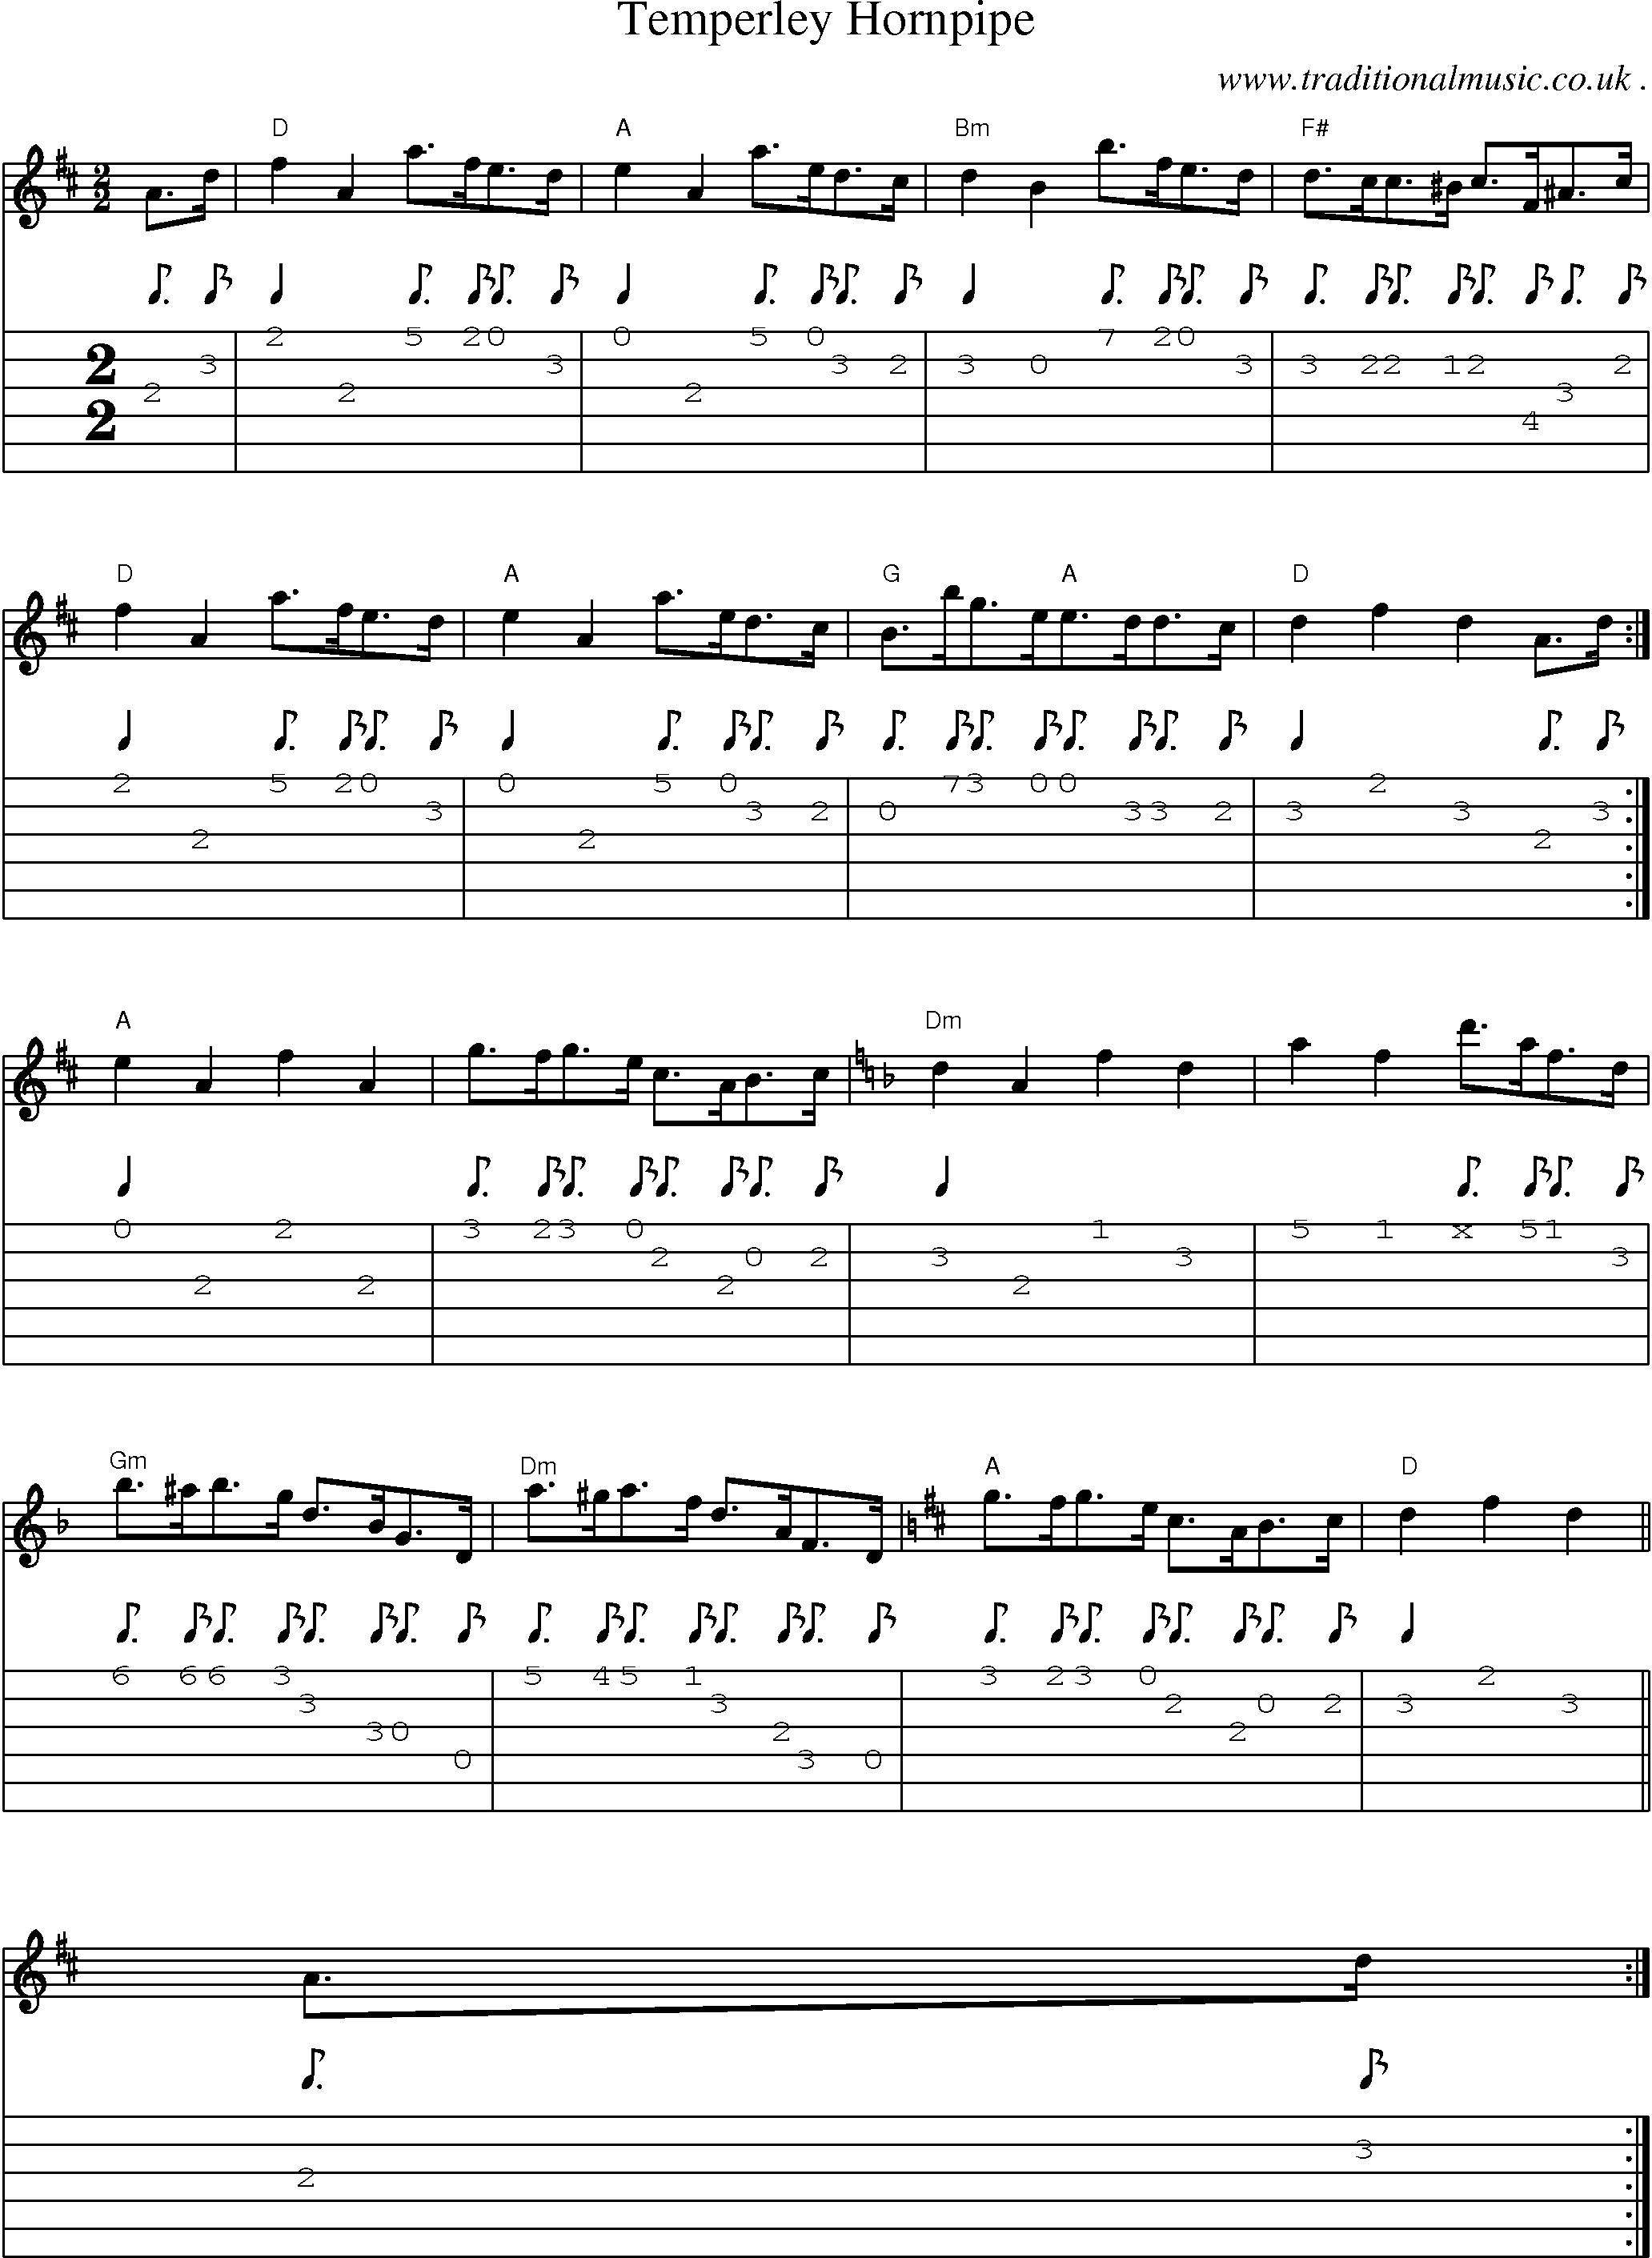 Sheet-Music and Guitar Tabs for Temperley Hornpipe